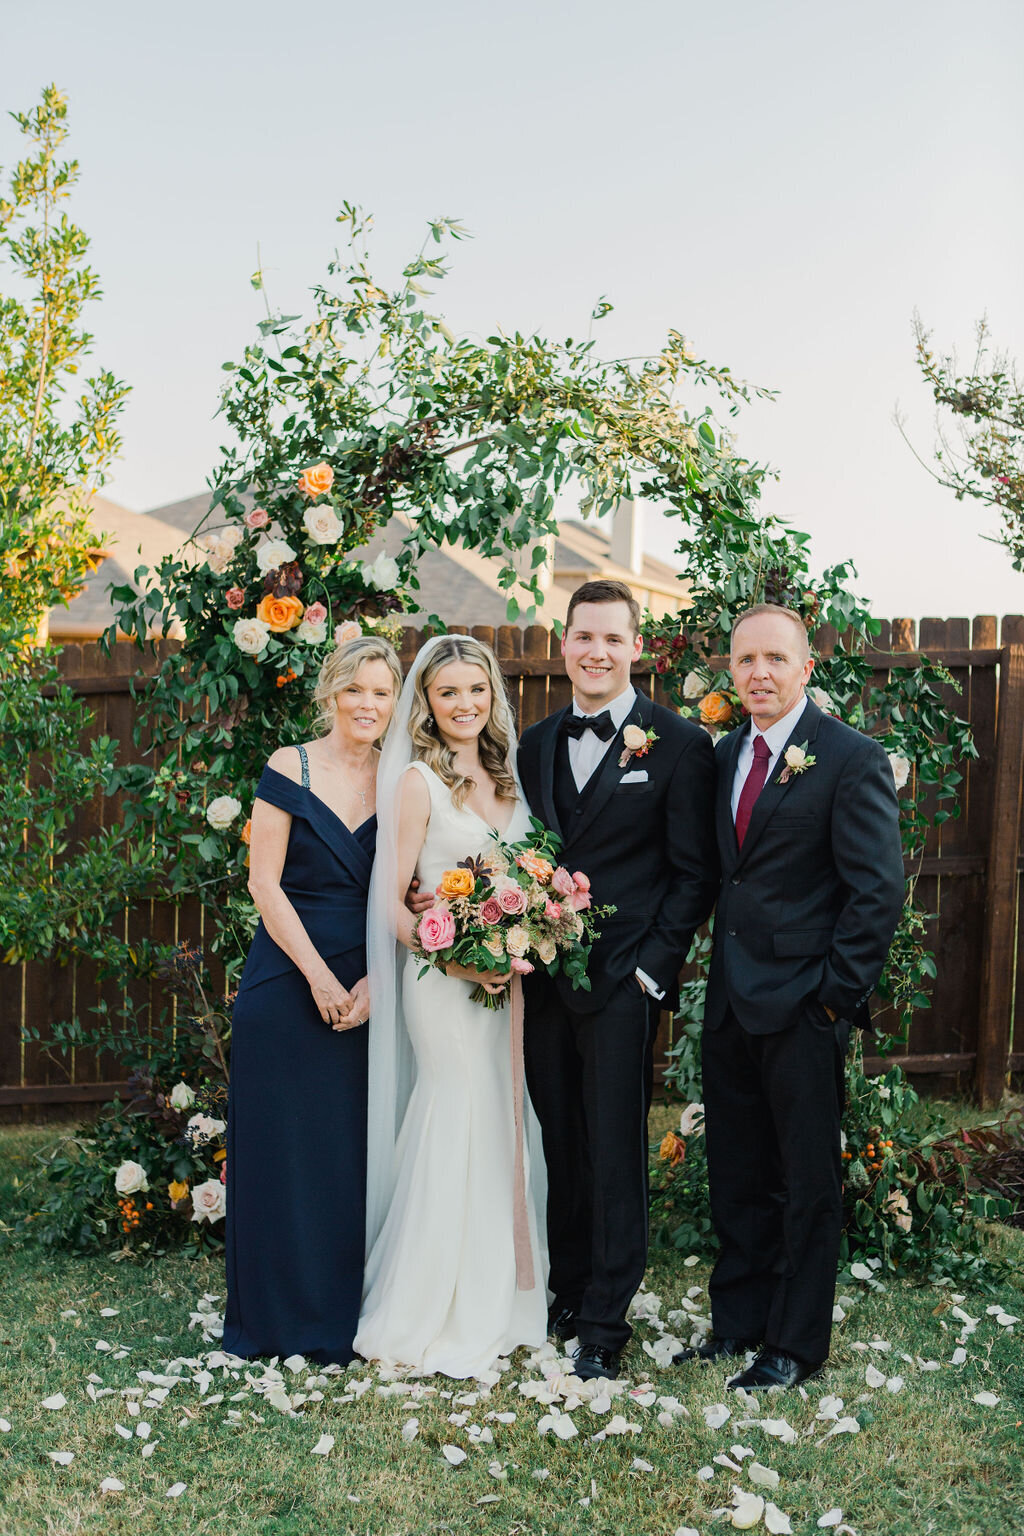 Family formal portraits at Fort Worth with Floral Arch by Vella Nest Floral - Best Dallas Wedding Florist